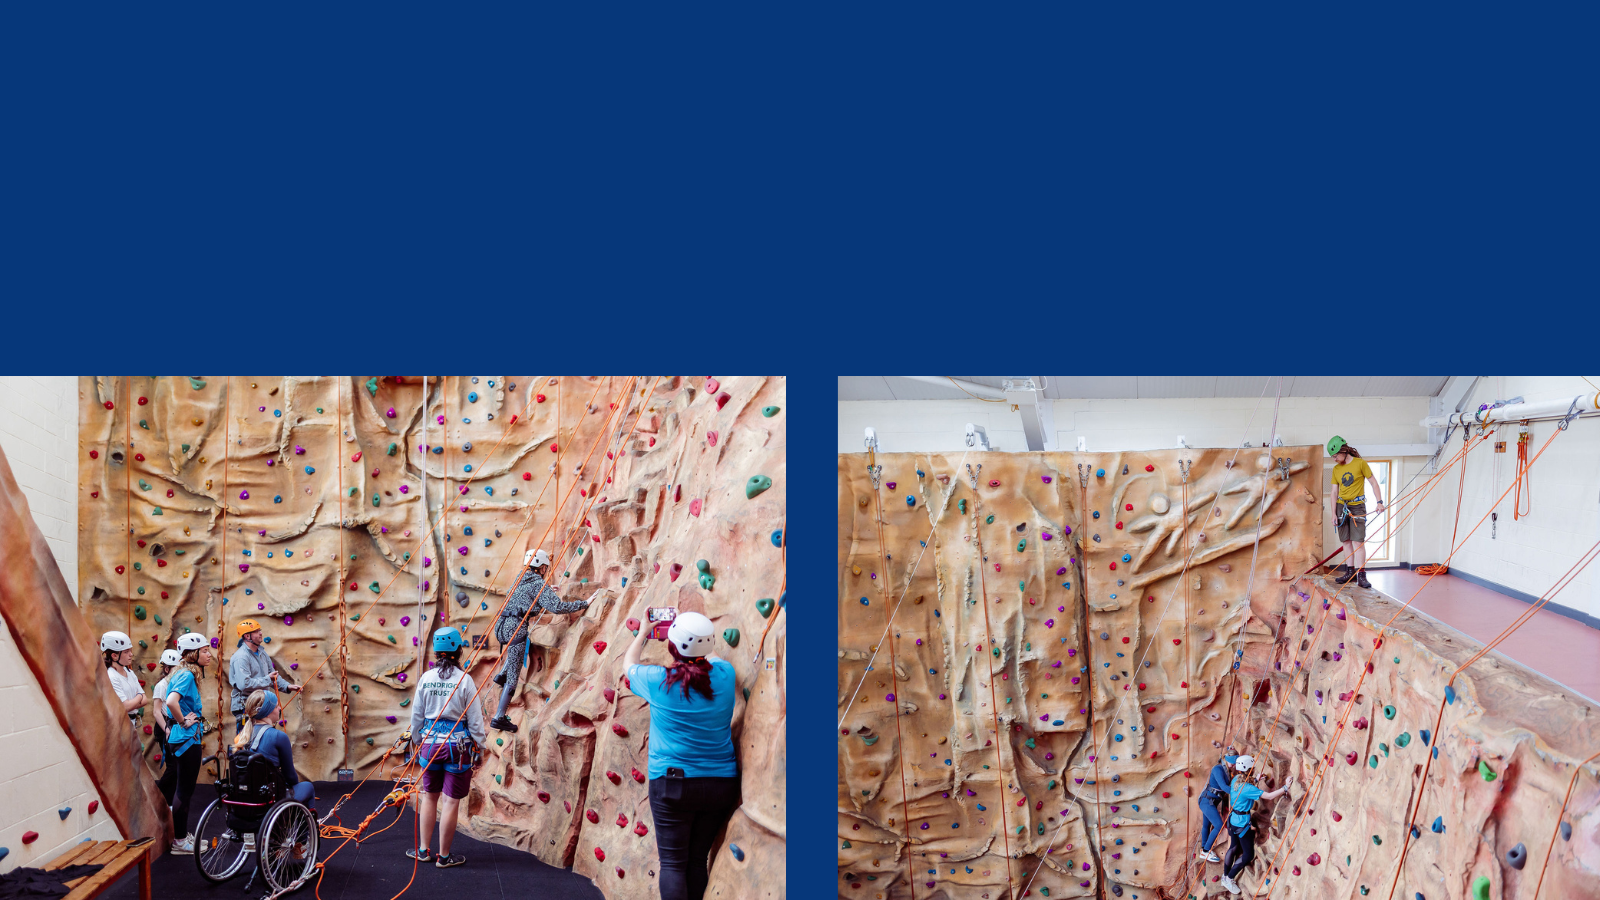 The image on the left-hand side is of a group of children and instructors stood around the indoor climbing wall with hard hats on. One child is a wheelchair user and there is a child climbing up the wall. The right-hand side image is of a child and instructor close to the top of the climbing wall.